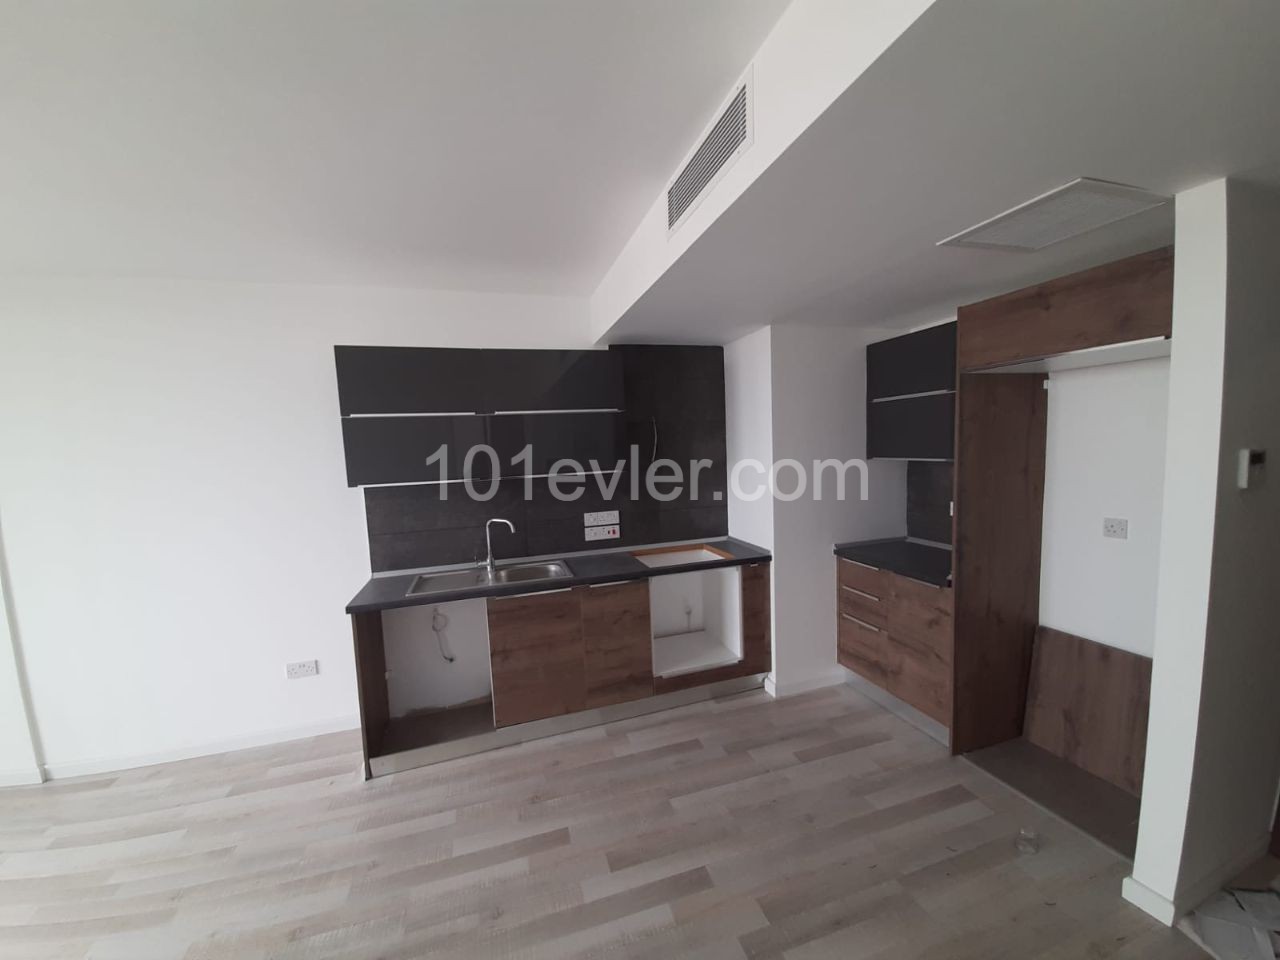 1+1 RESIDENCE FLAT IN CENTER OF FAMAGUSTA, NEAR EMU AND LEMAR ** 